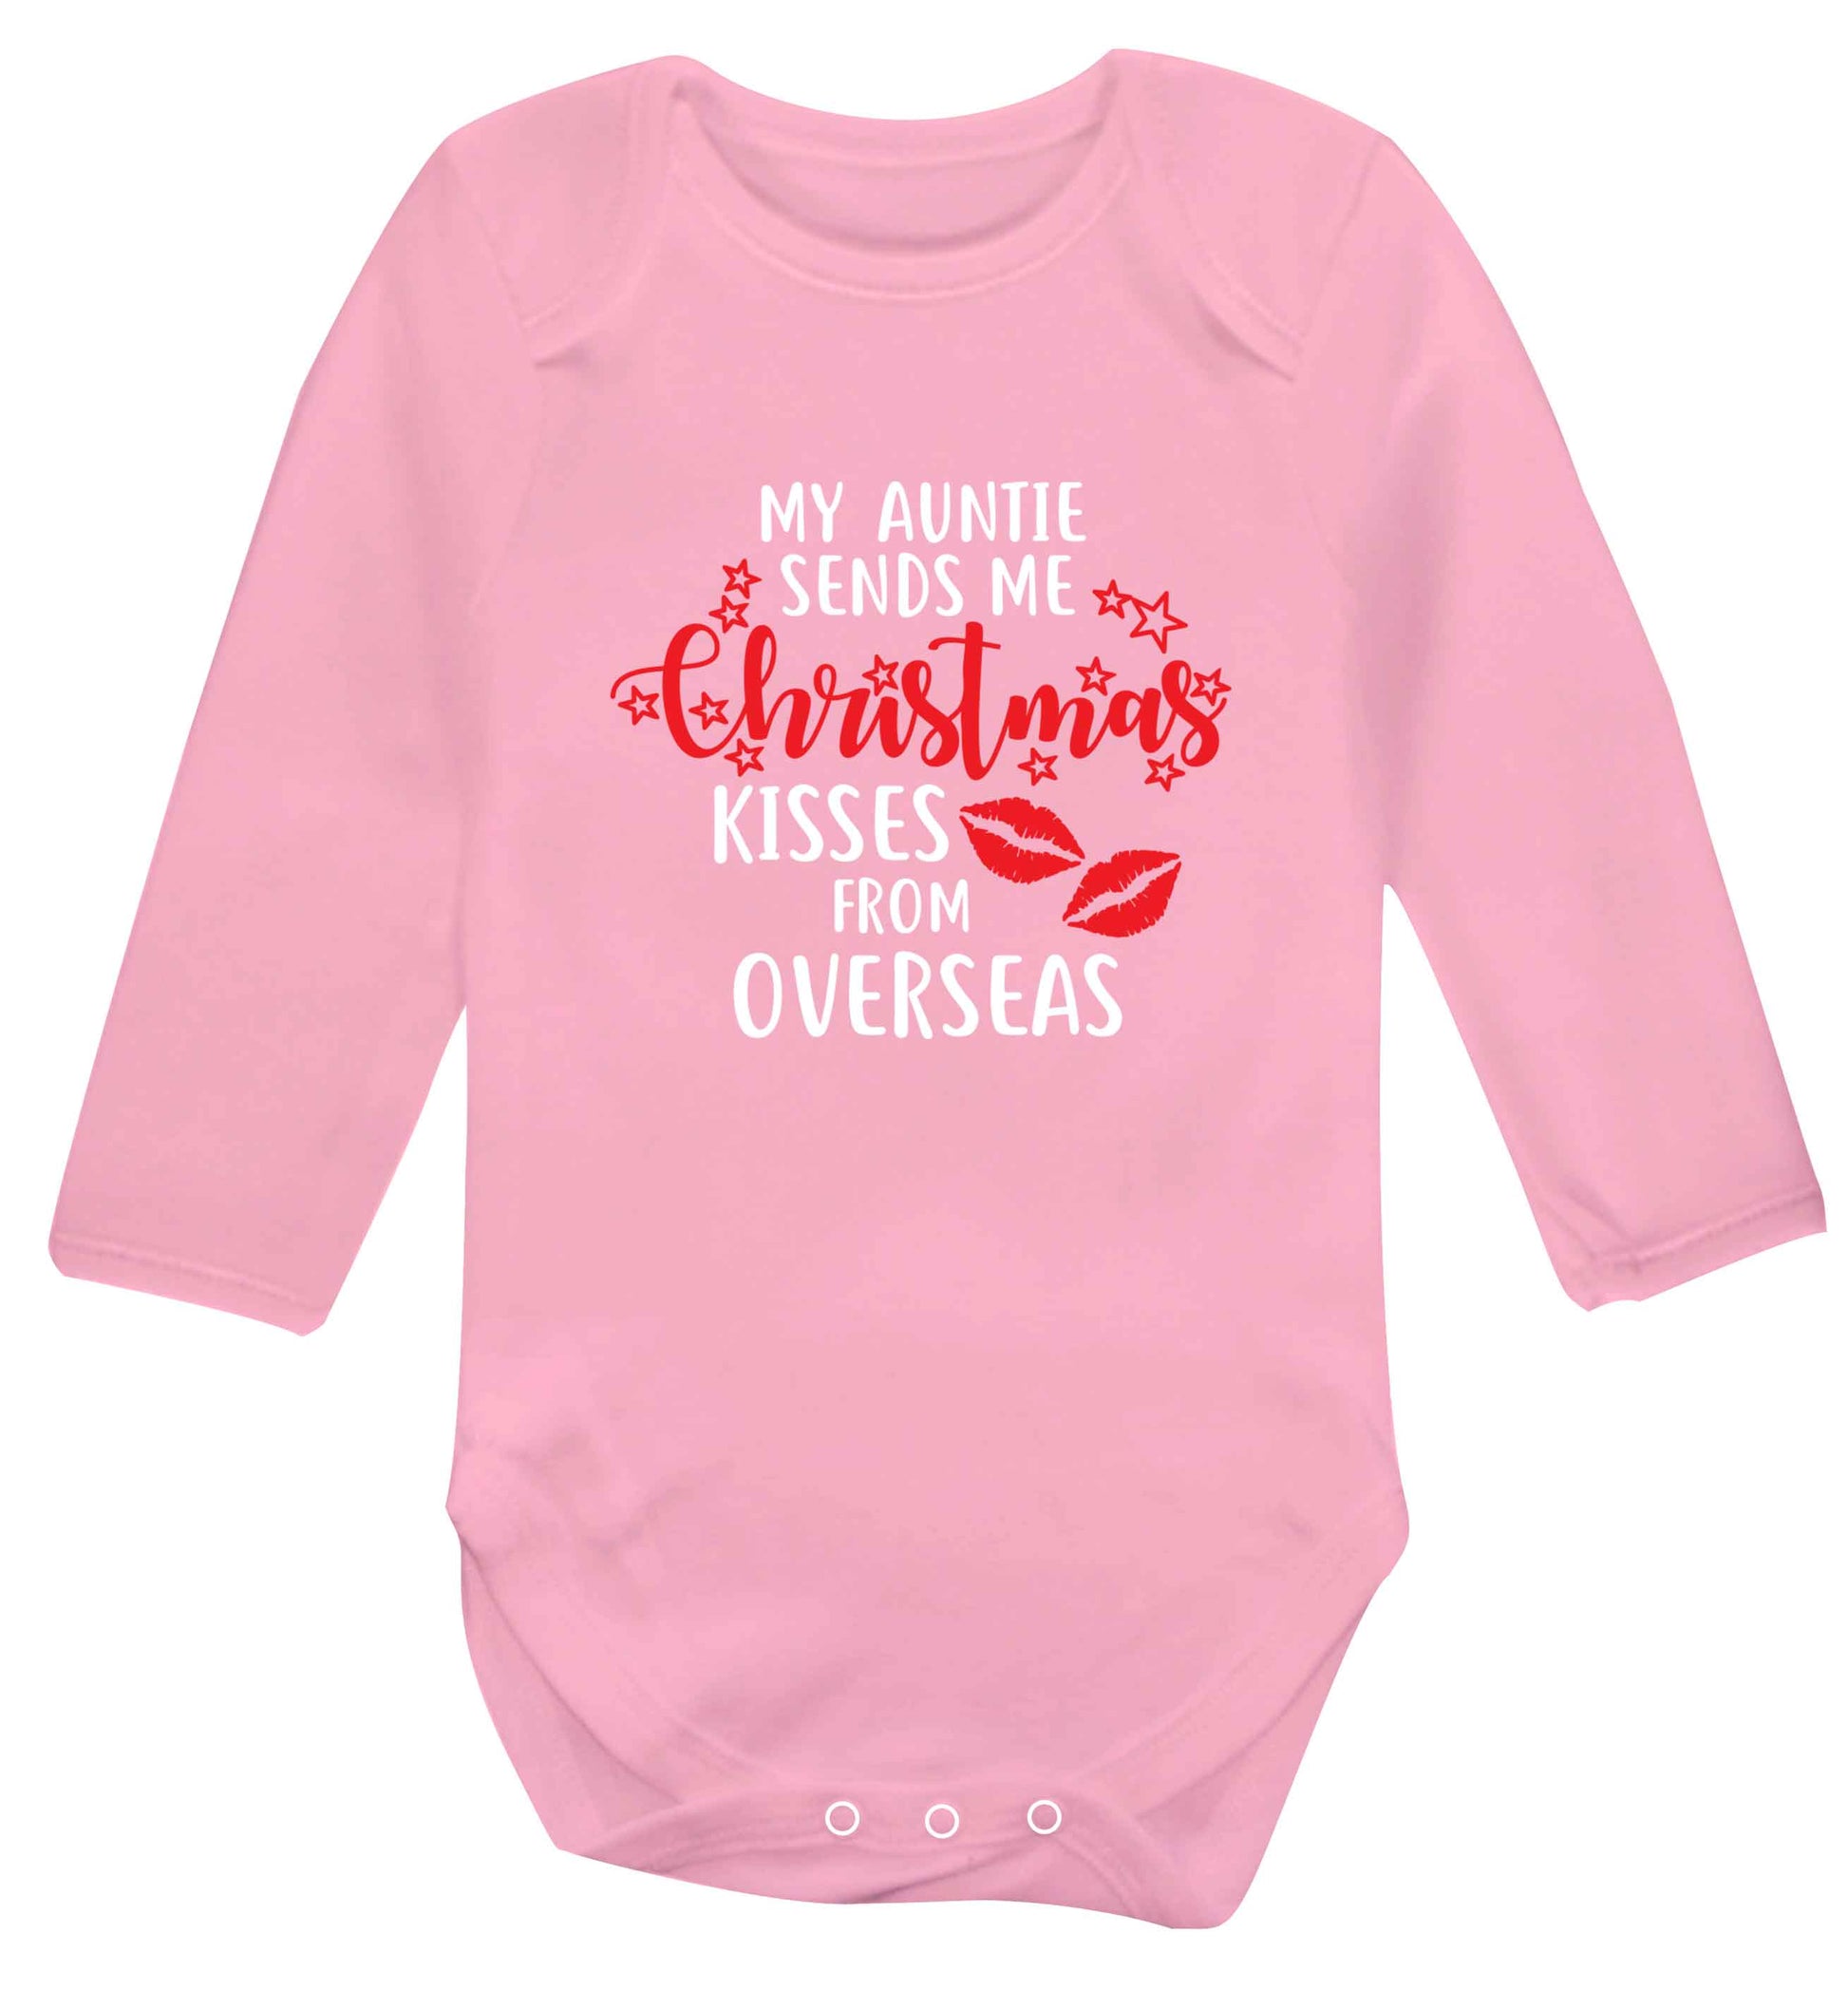 Auntie Christmas Kisses Overseas baby vest long sleeved pale pink 6-12 months